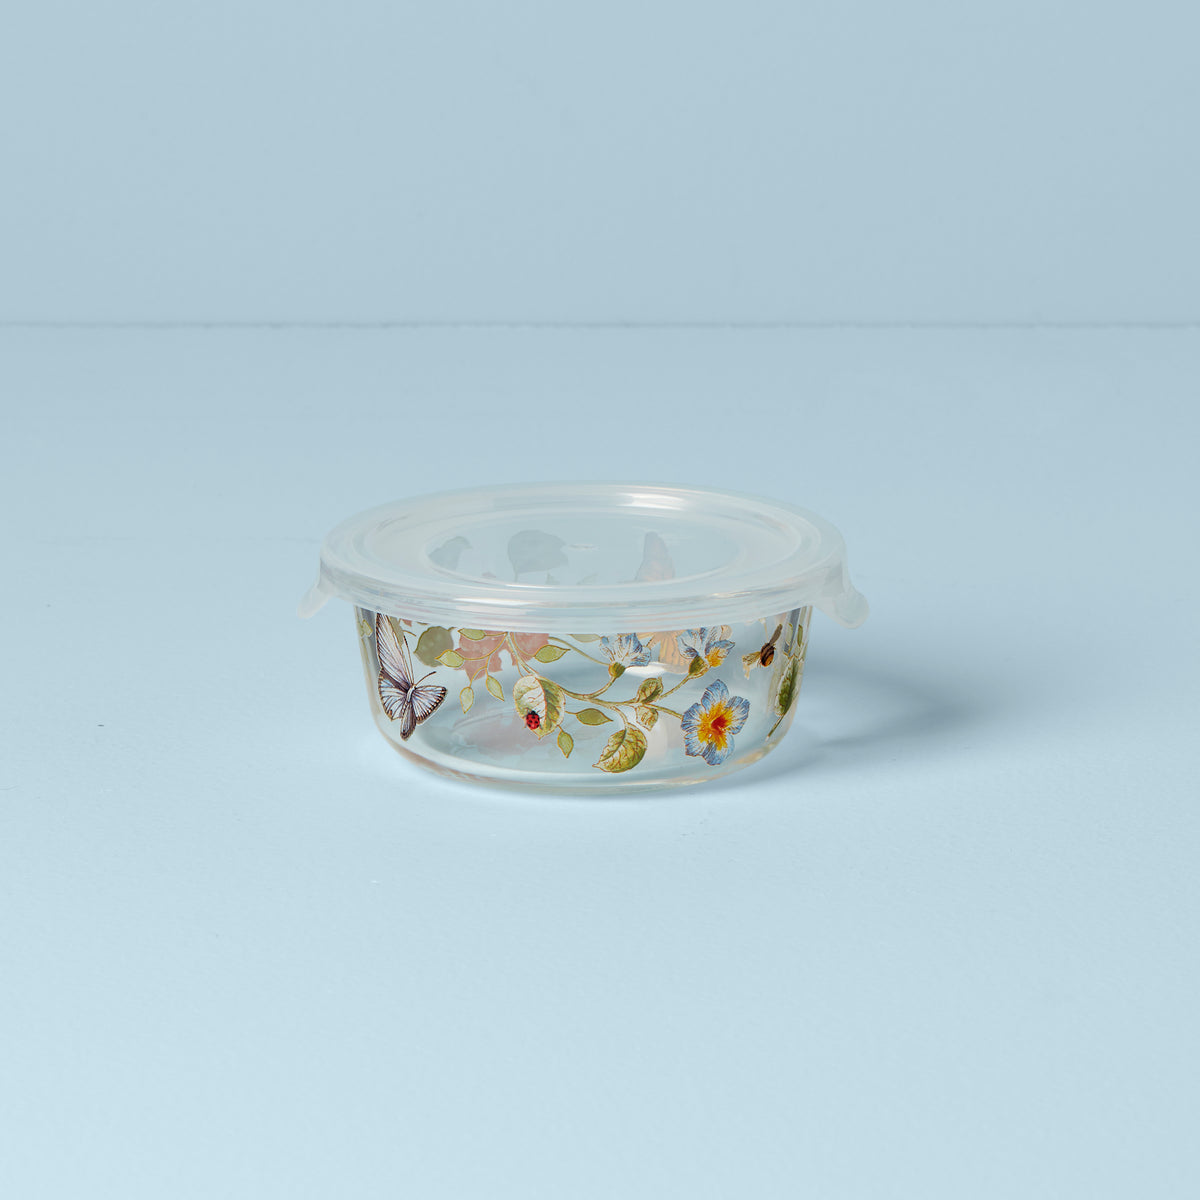 Butterfly Meadow Small Glass Food Container – Lenox Corporation